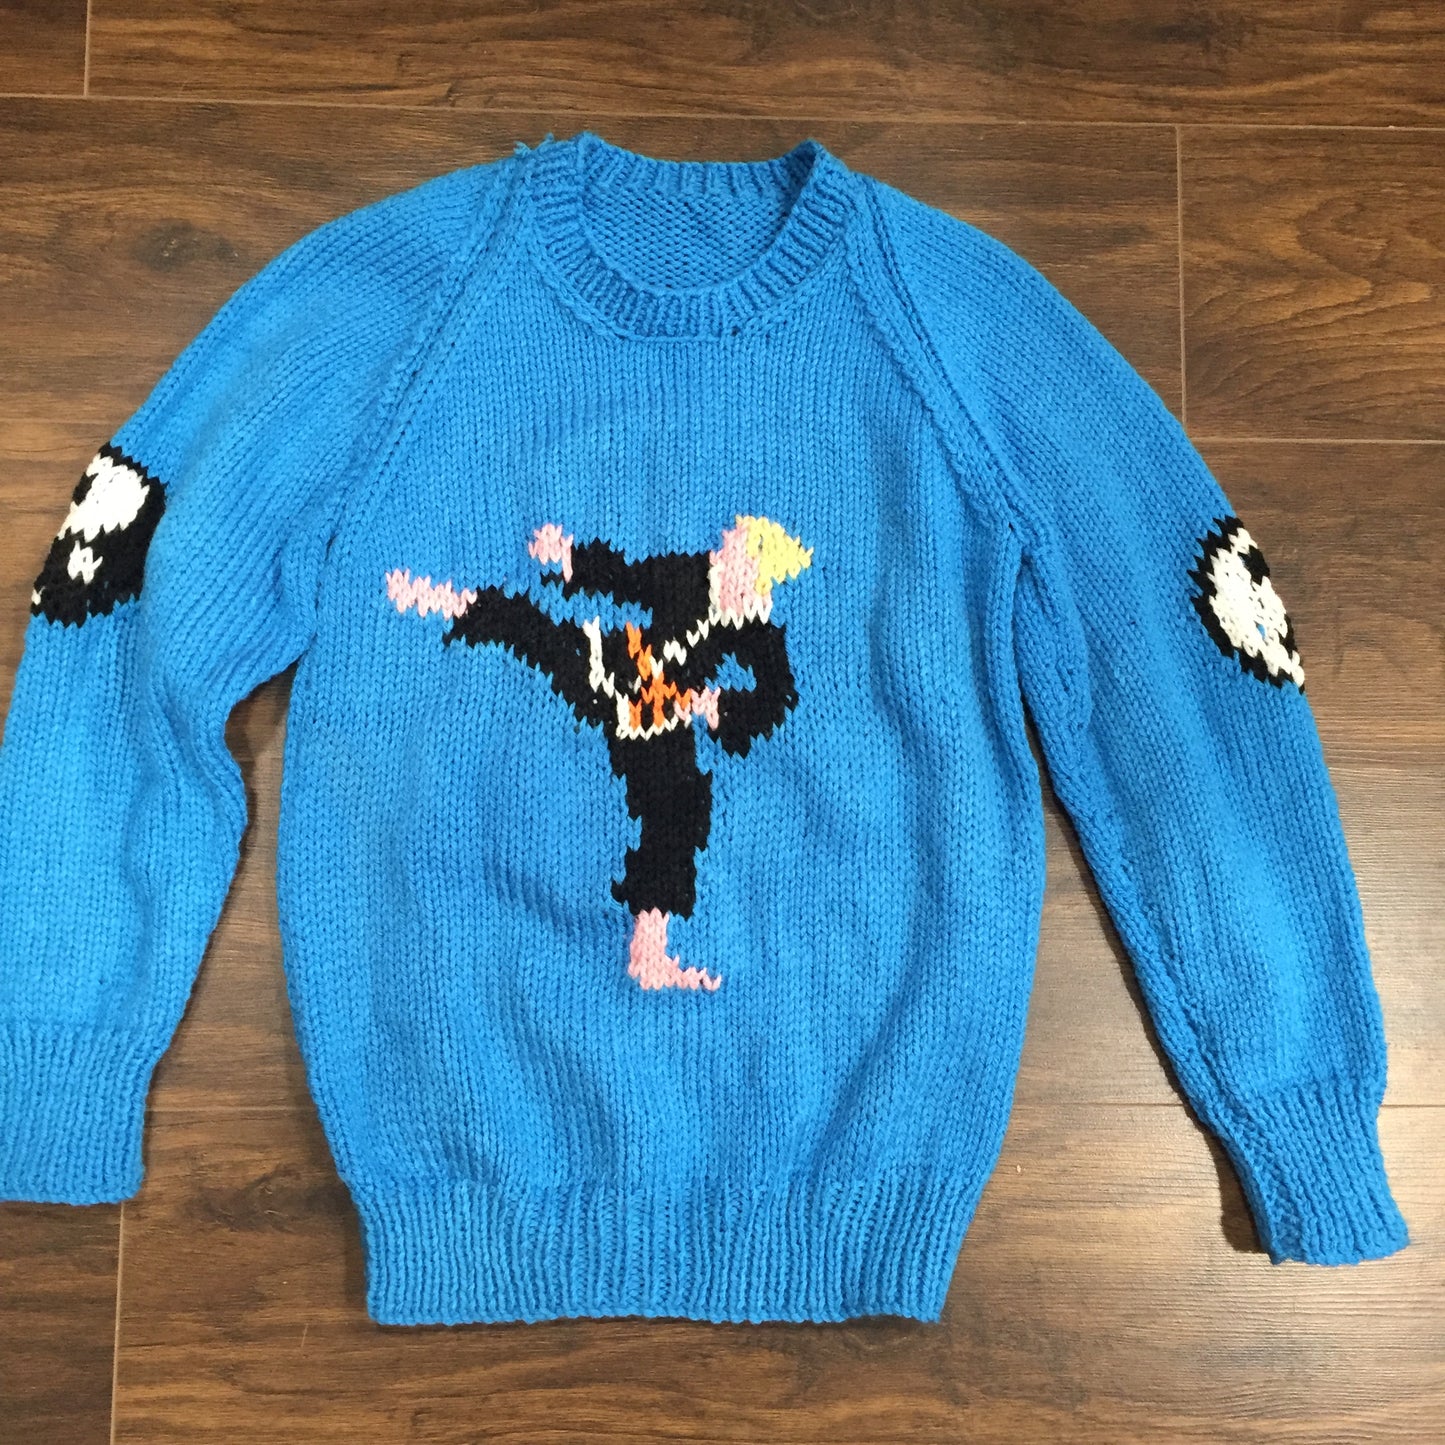 Hand knitted martial arts wool jumper small